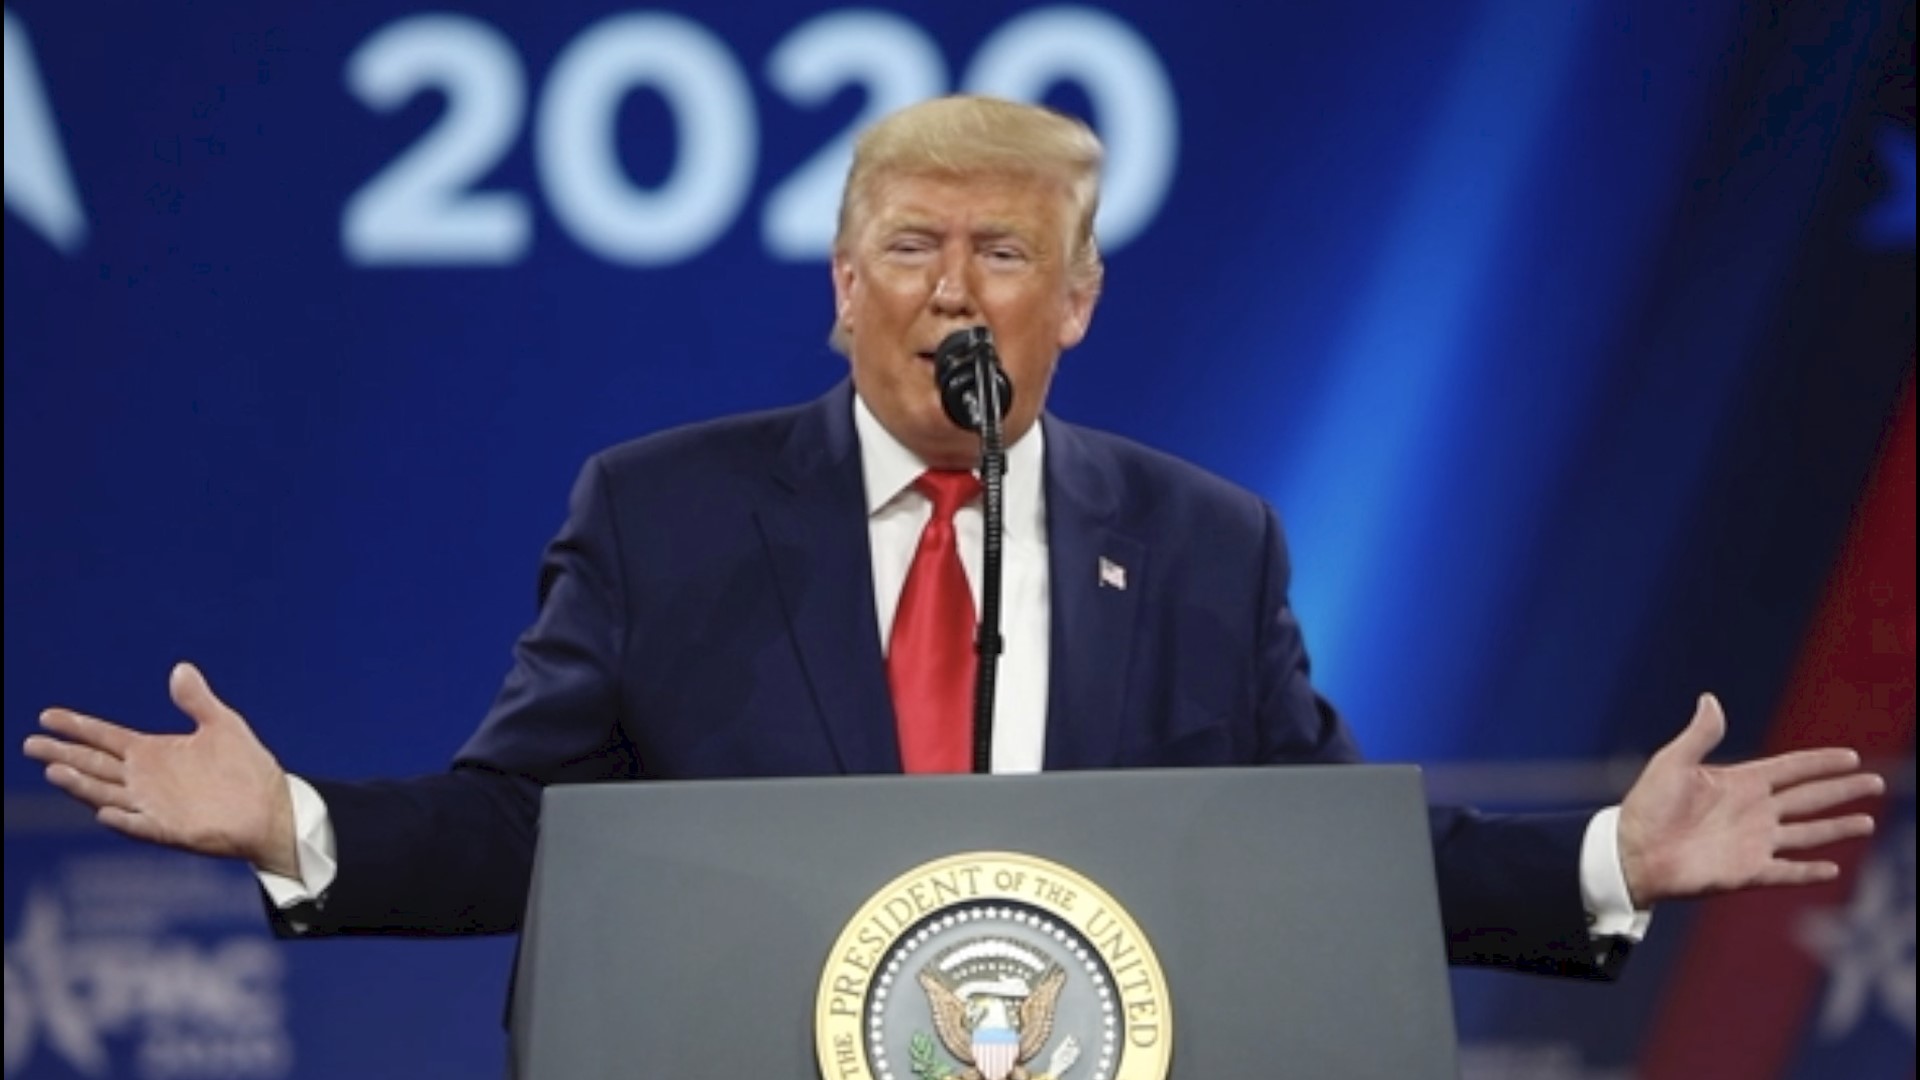 President Trump once again attacks mail-in voting, but this time floats the idea of delaying the 2020 presidential election. Veuer's Justin Kircher has the story.